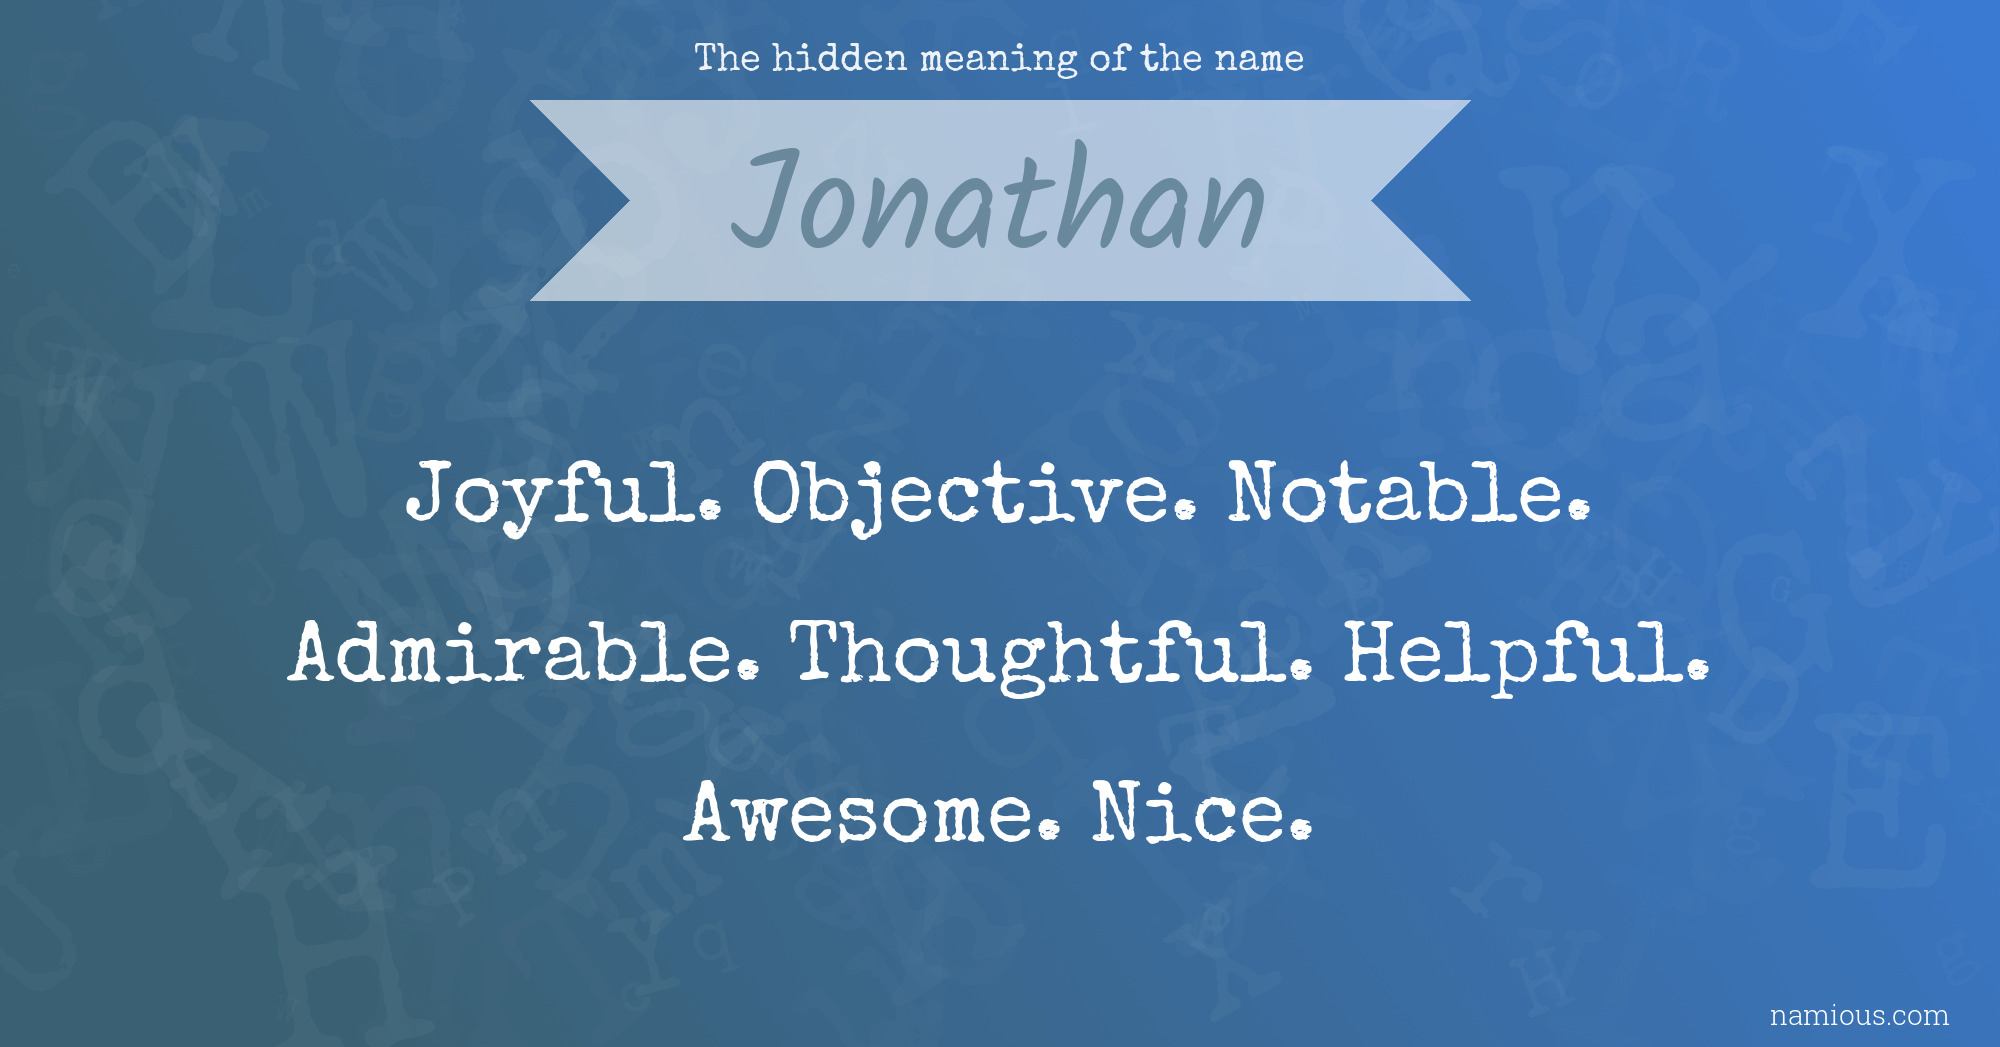 The hidden meaning of the name Jonathan